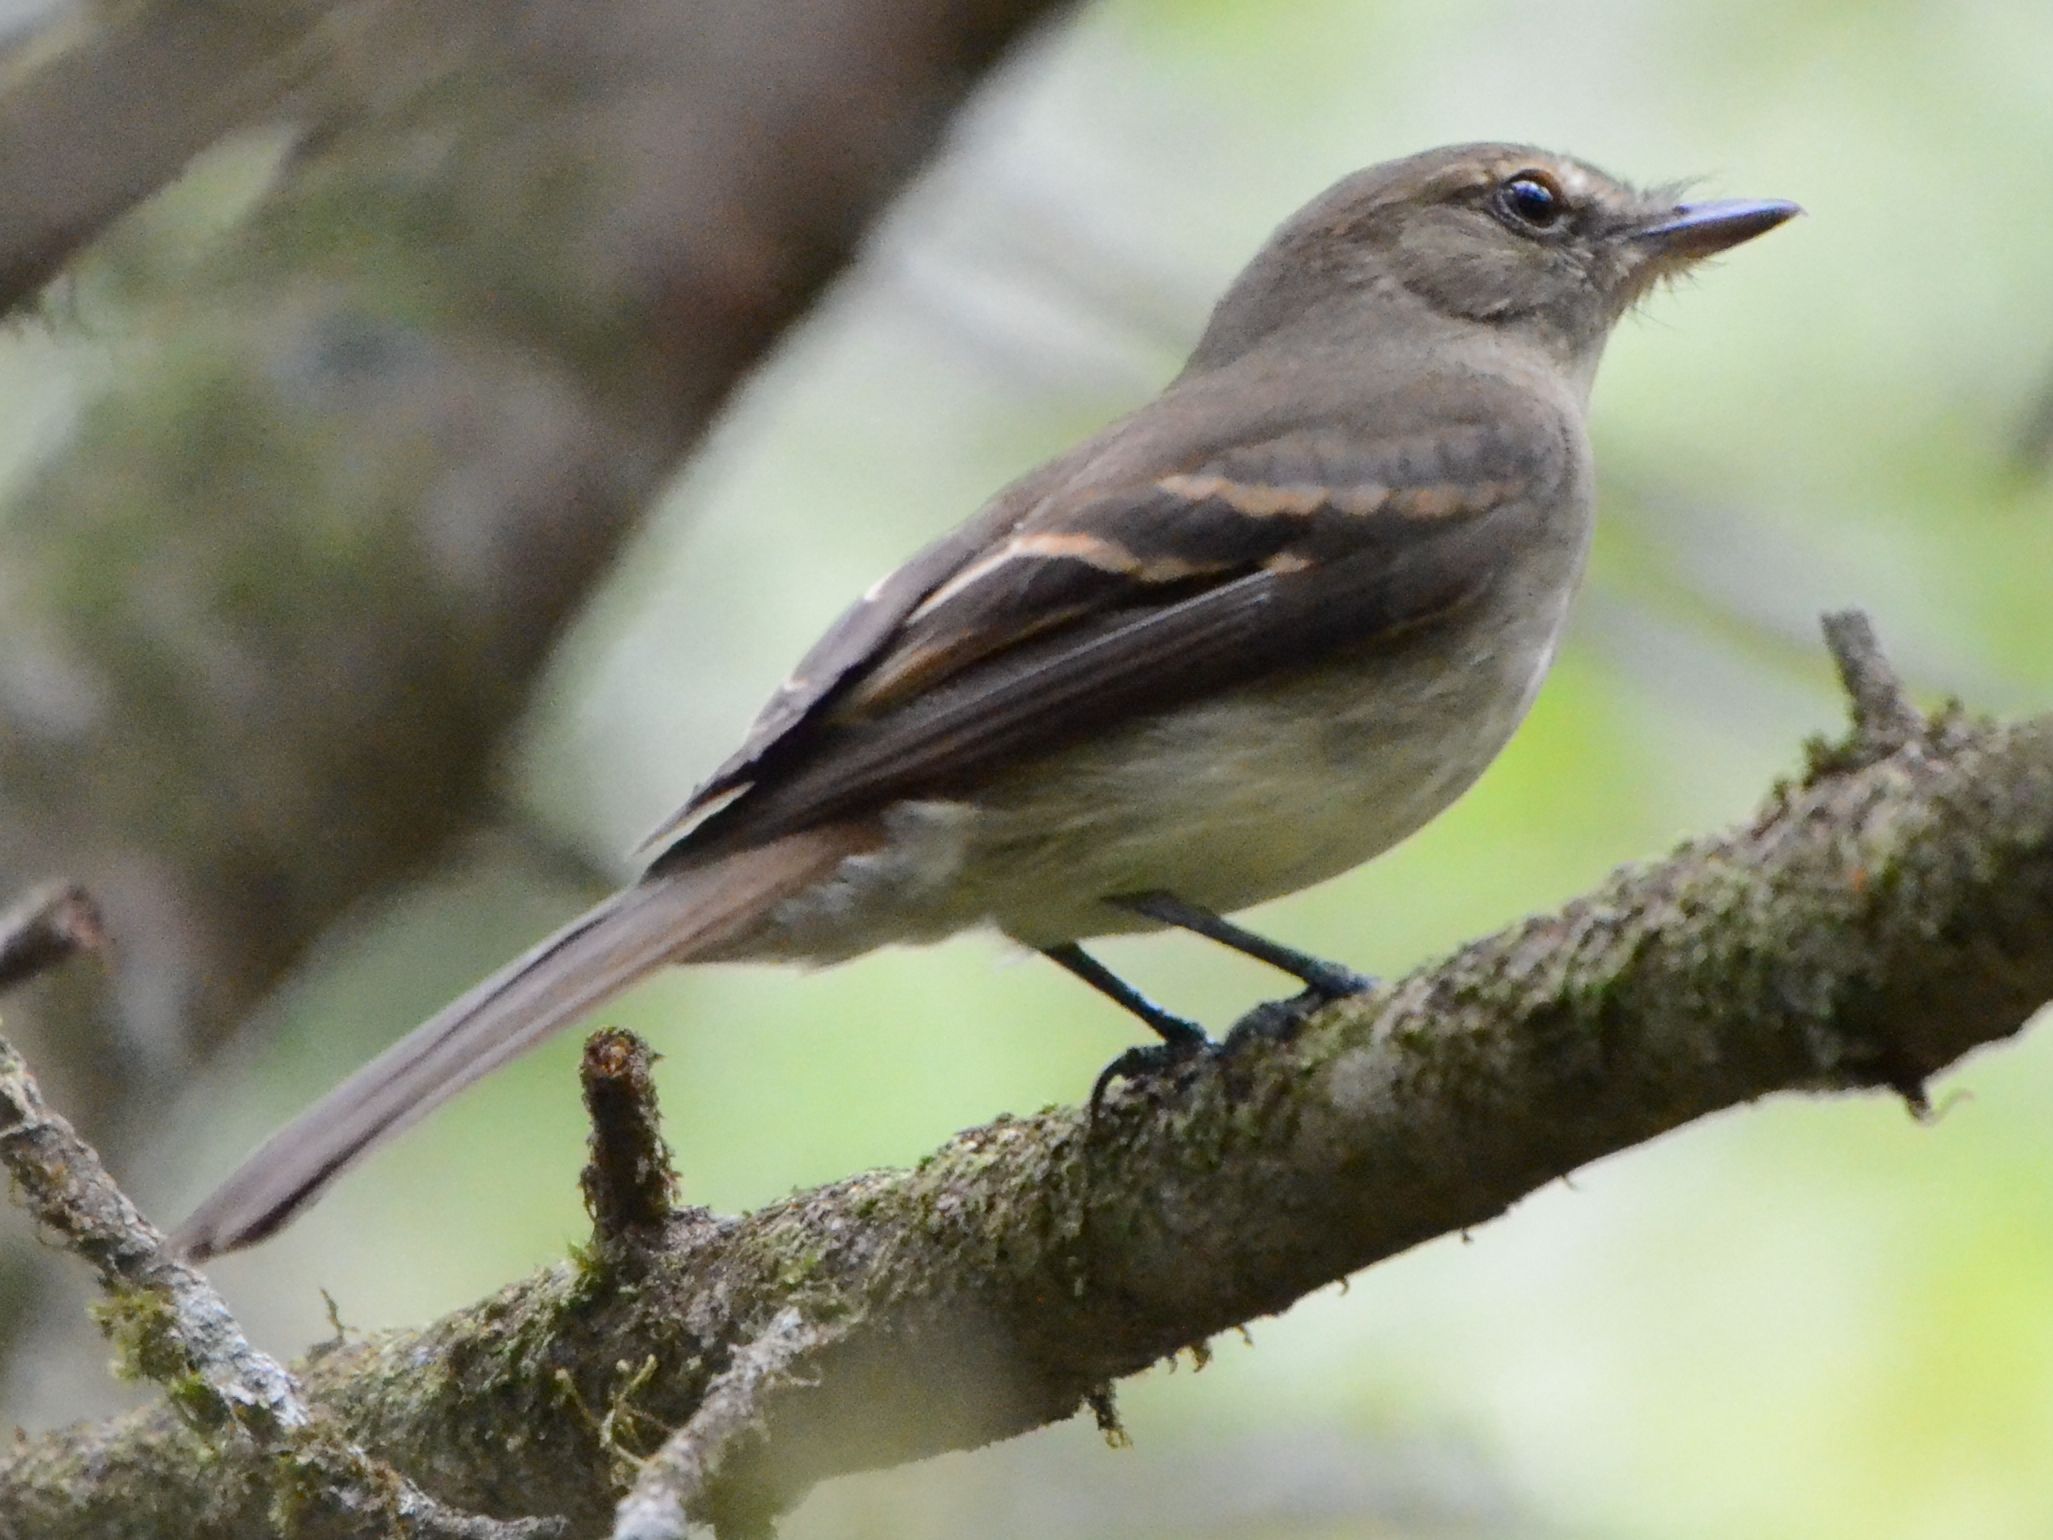 Click picture to see more Fuscous Flycatchers.